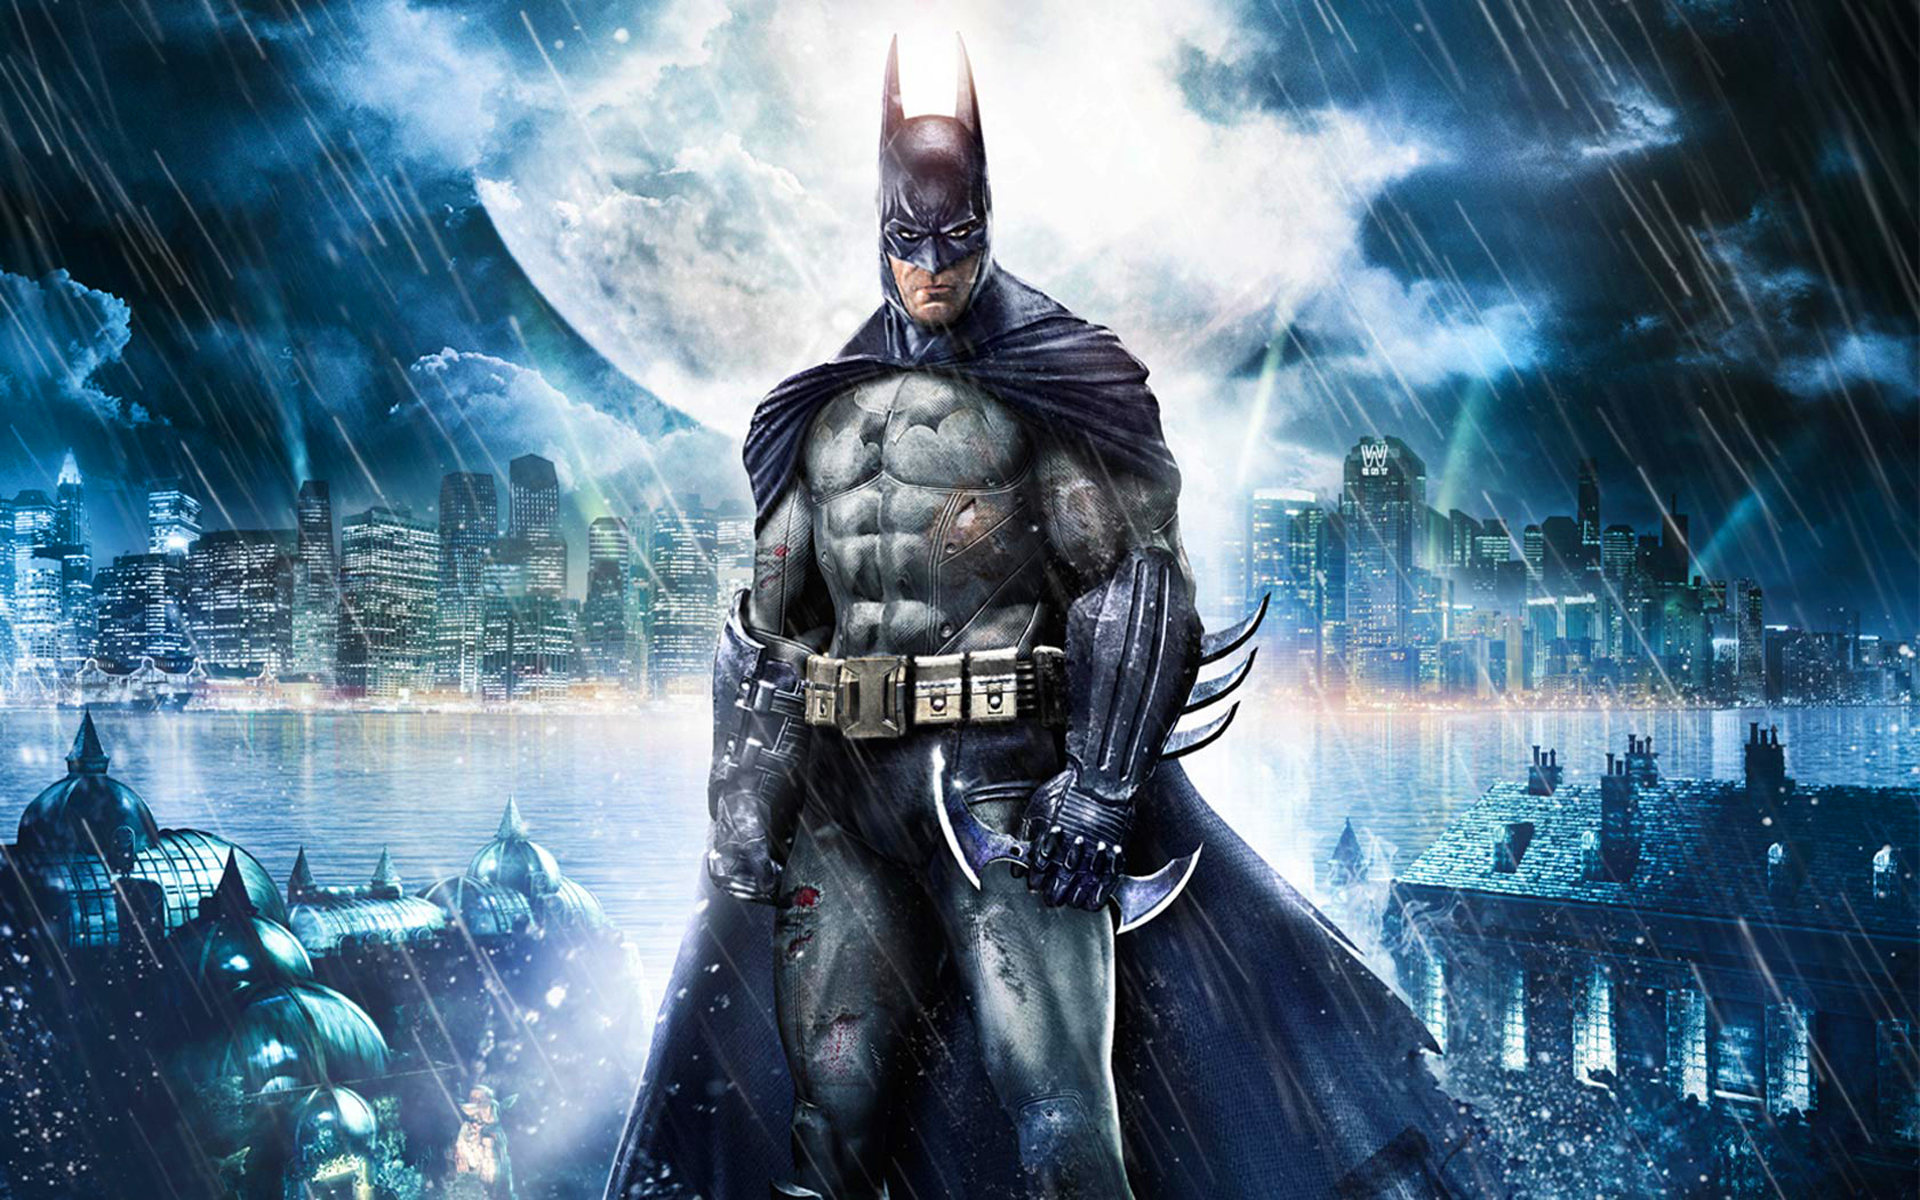 Batman: Return to Arkham announced for PS4 and Xbox One, see the trailer |  